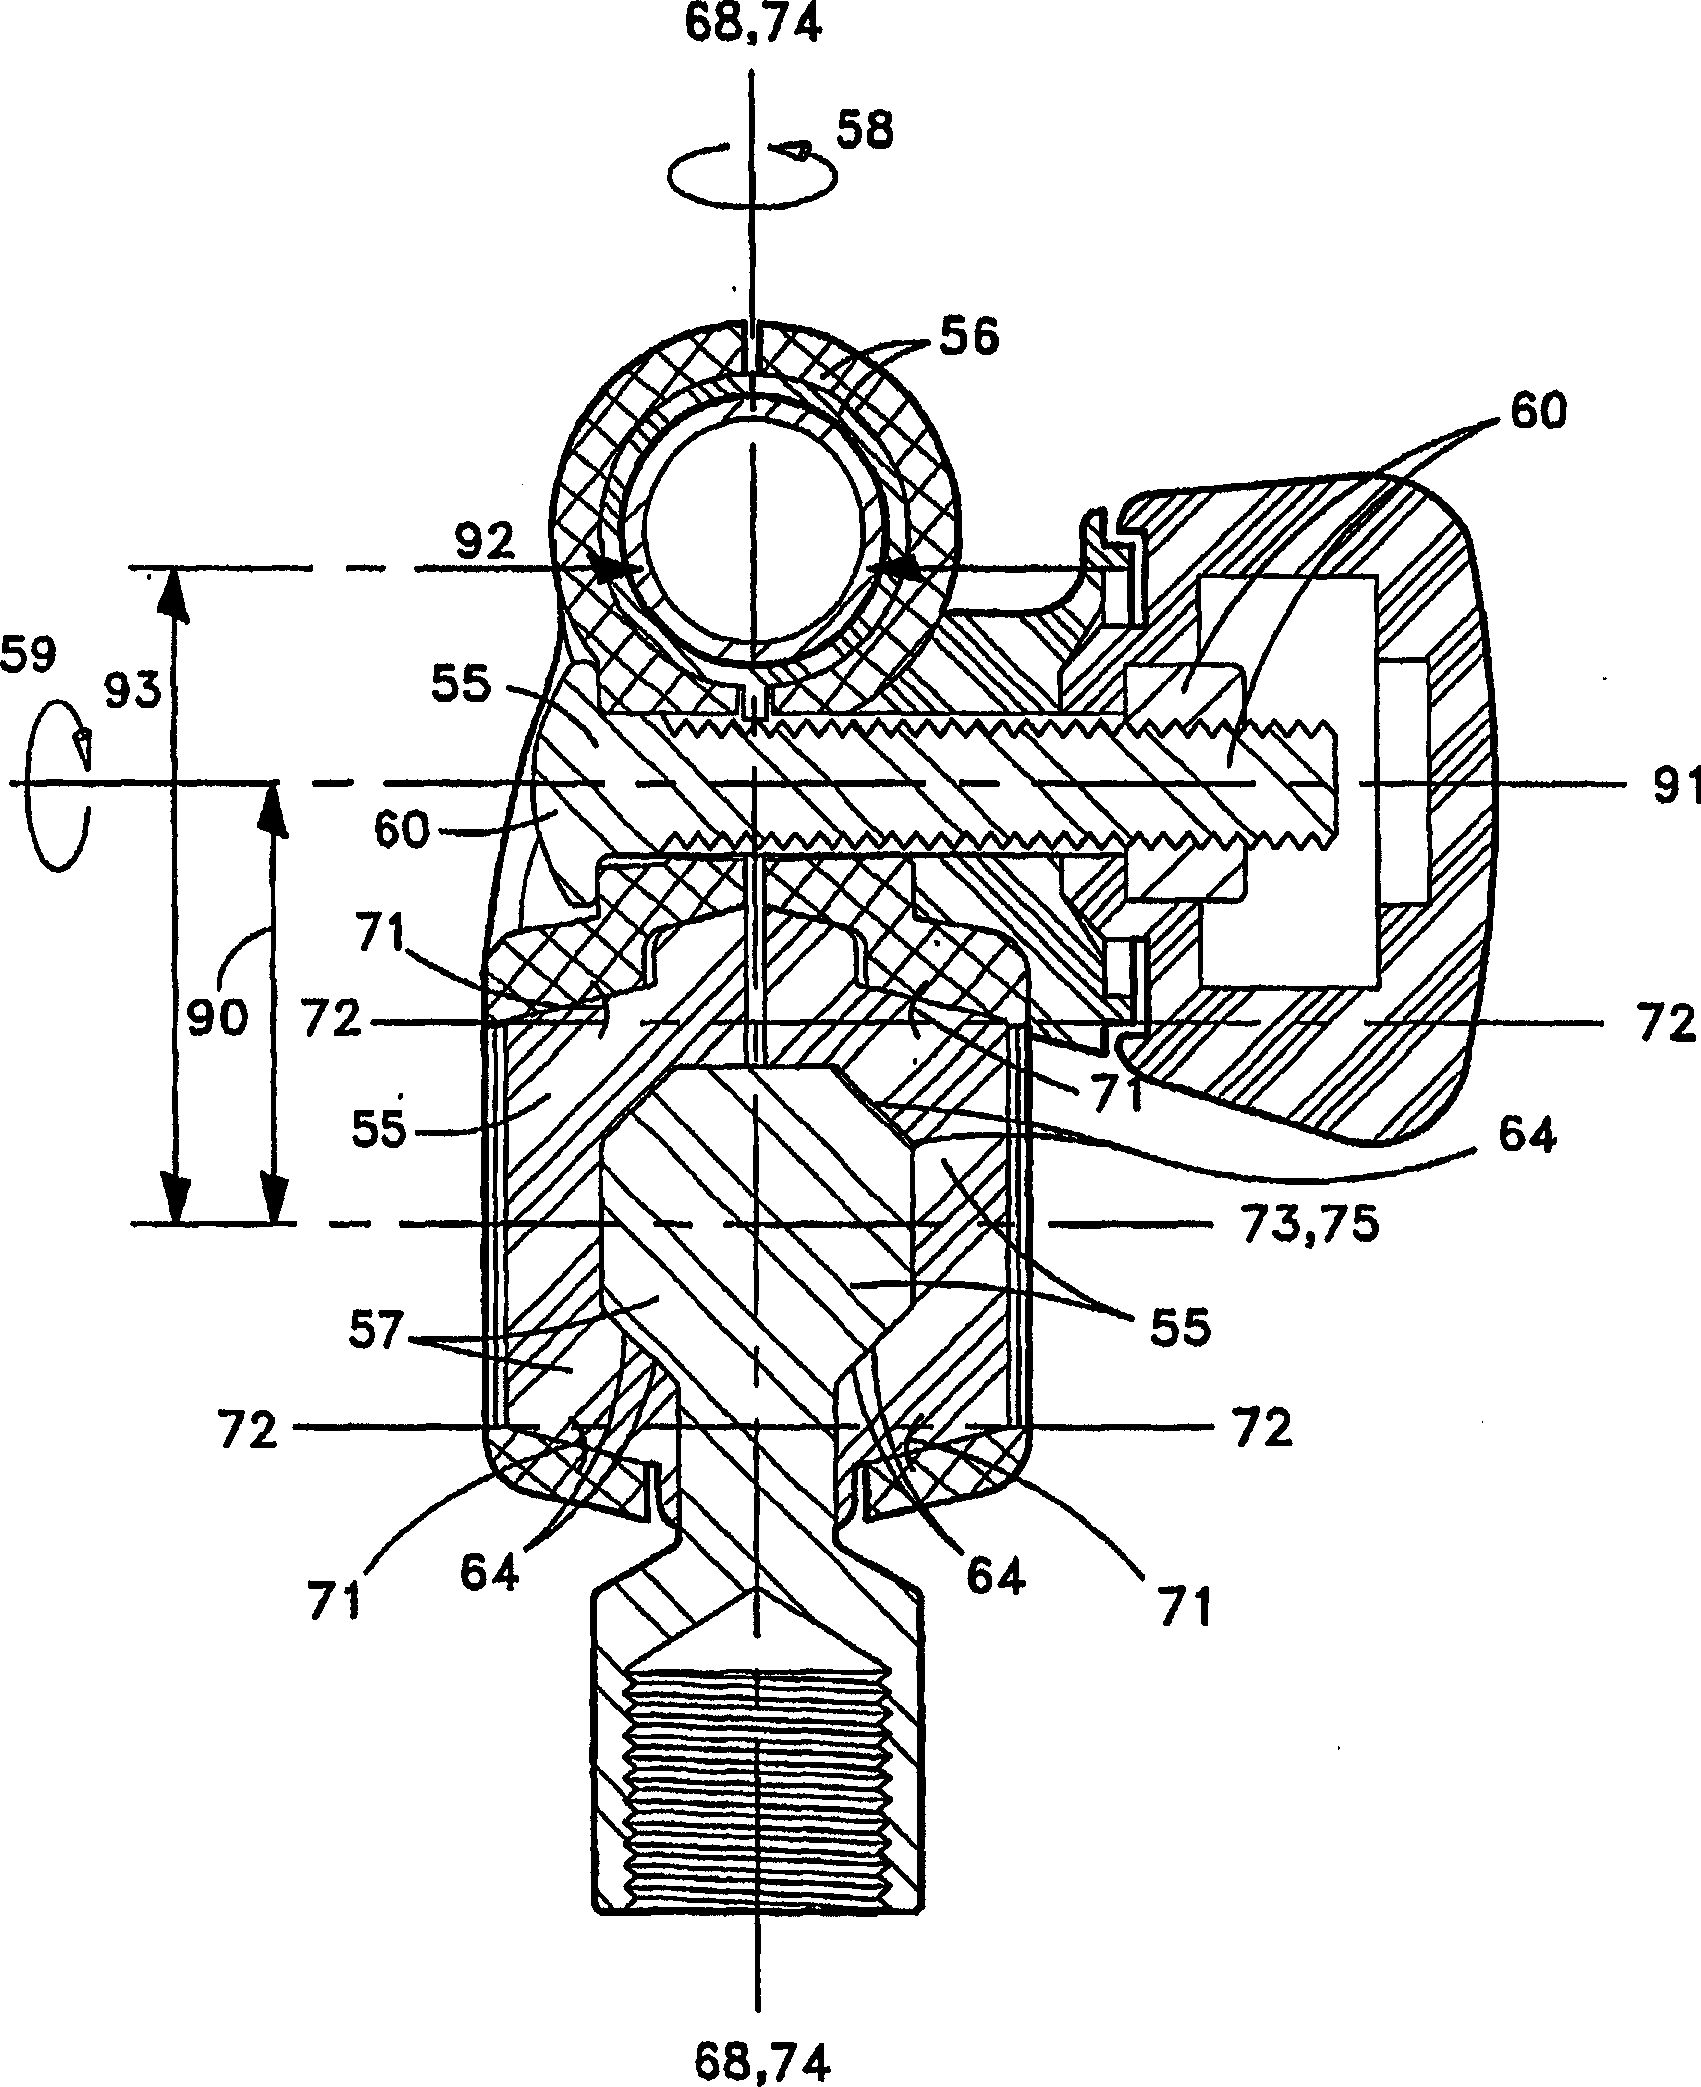 Microphone support boom movement control apparatus and method with differential motion isolation capability